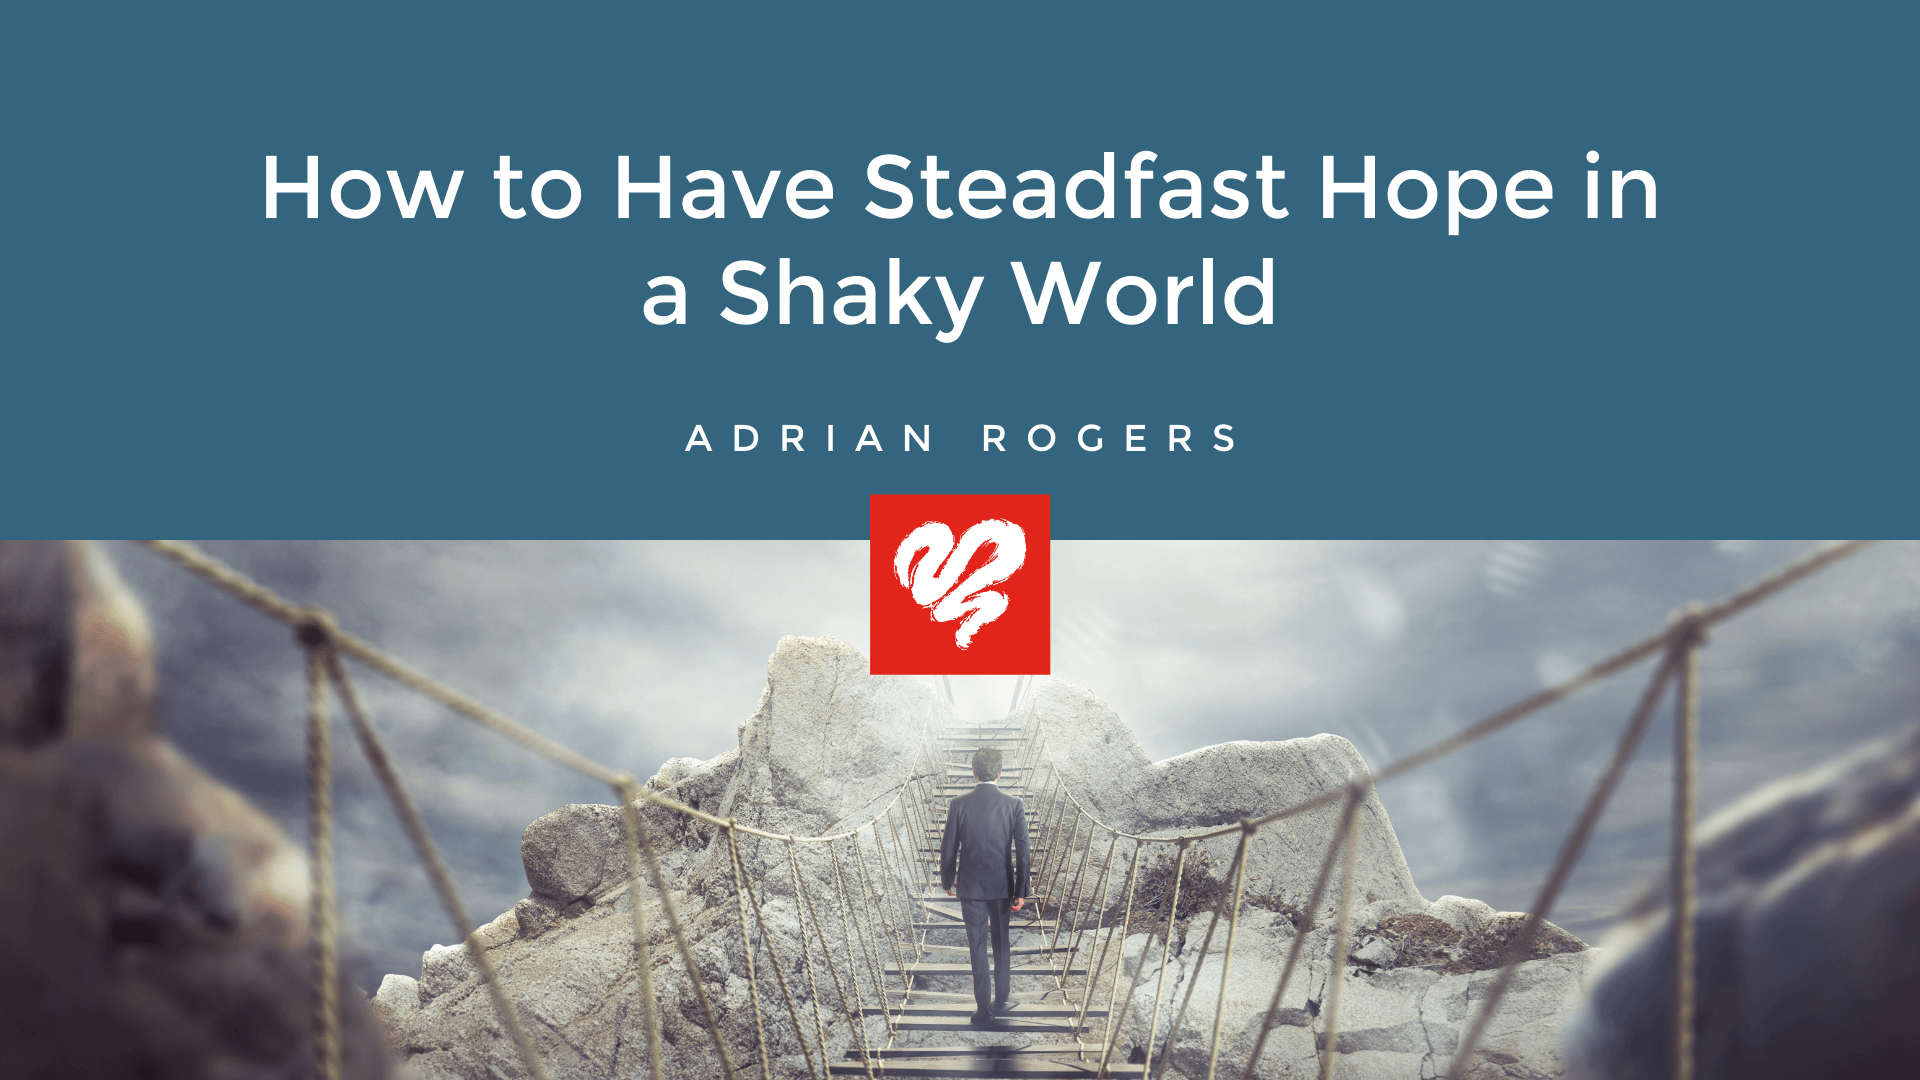 How to Have Steadfast Hope in a Shaky World 1920x1080